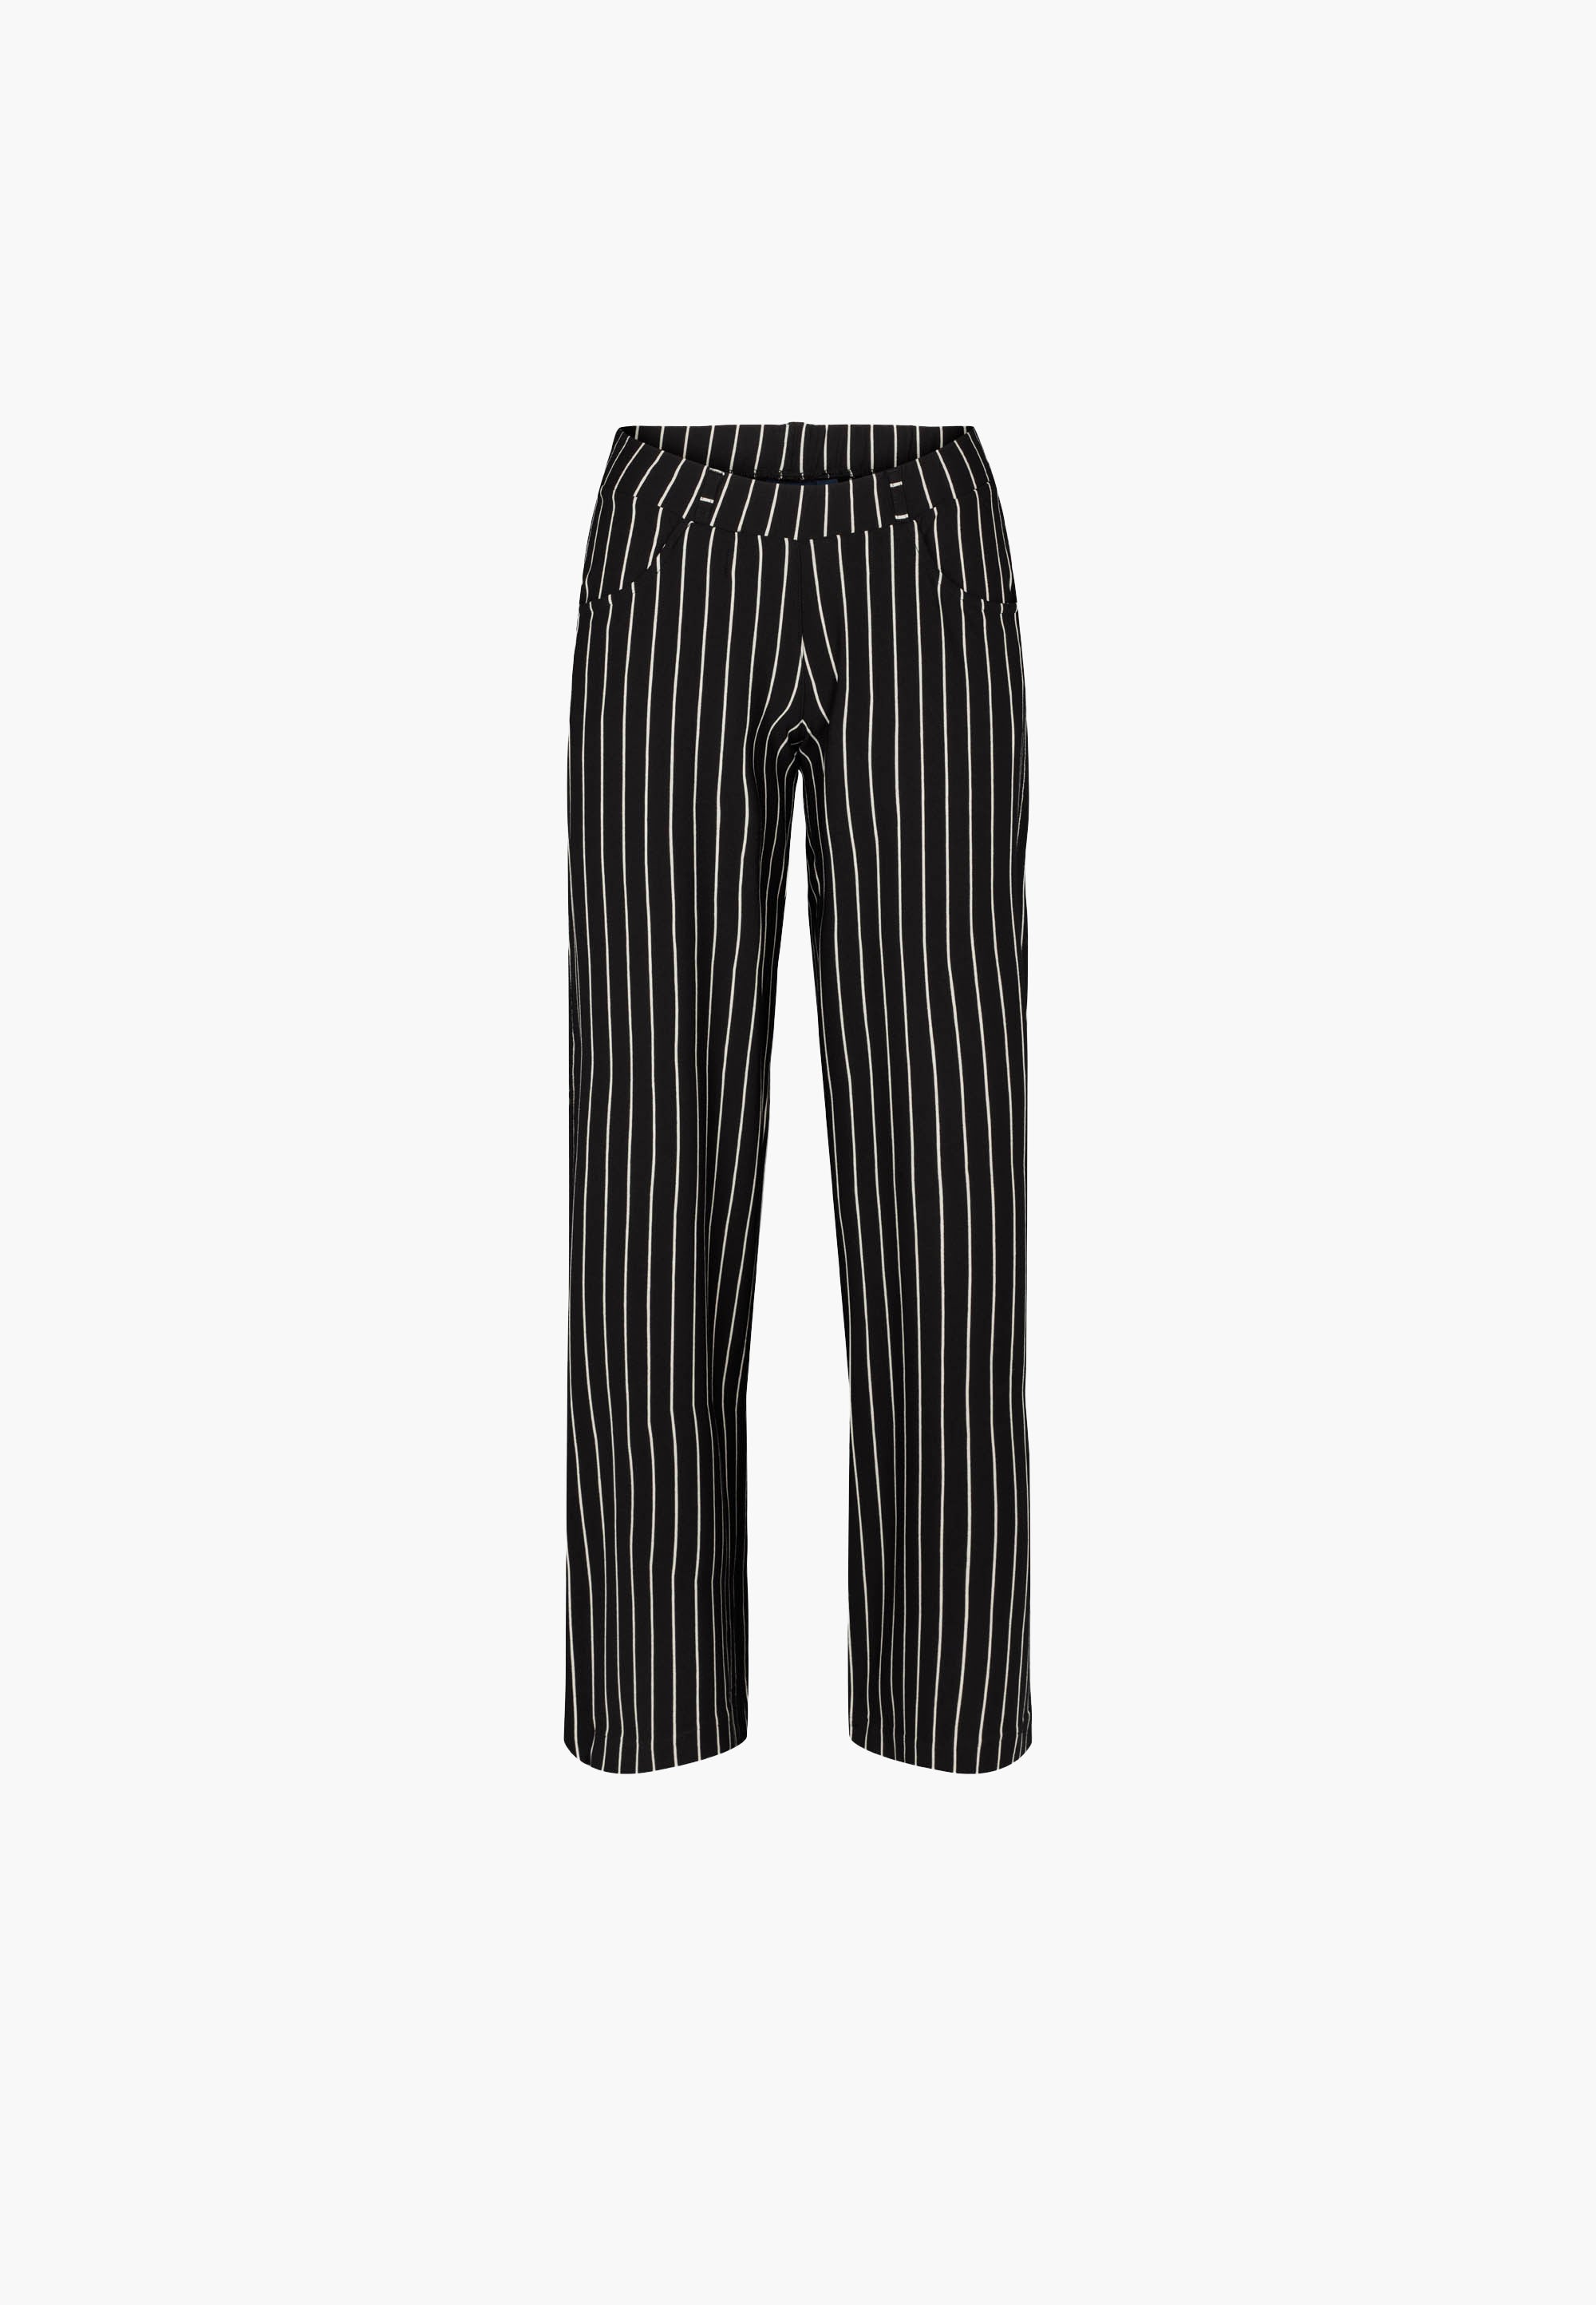 LAURIE  Donna Loose Jersey - Short Length Trousers LOOSE 99222 Black Stripe